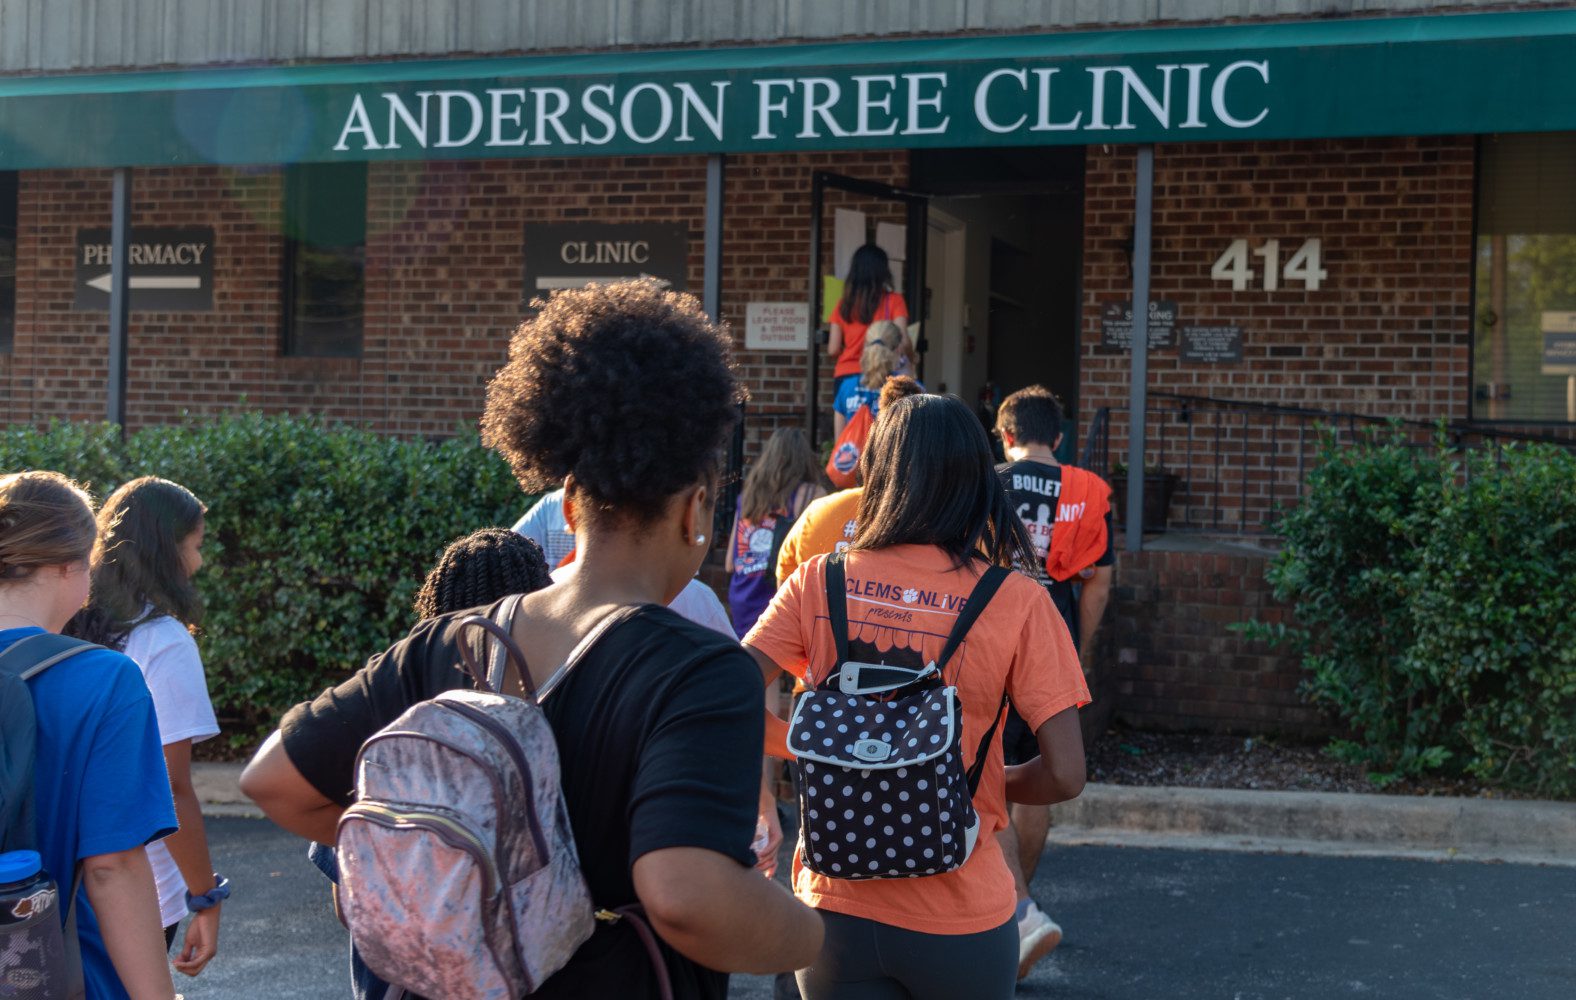 Students head to the Anderson Free Clinic as part of the 2018 Campuswide Day of Service